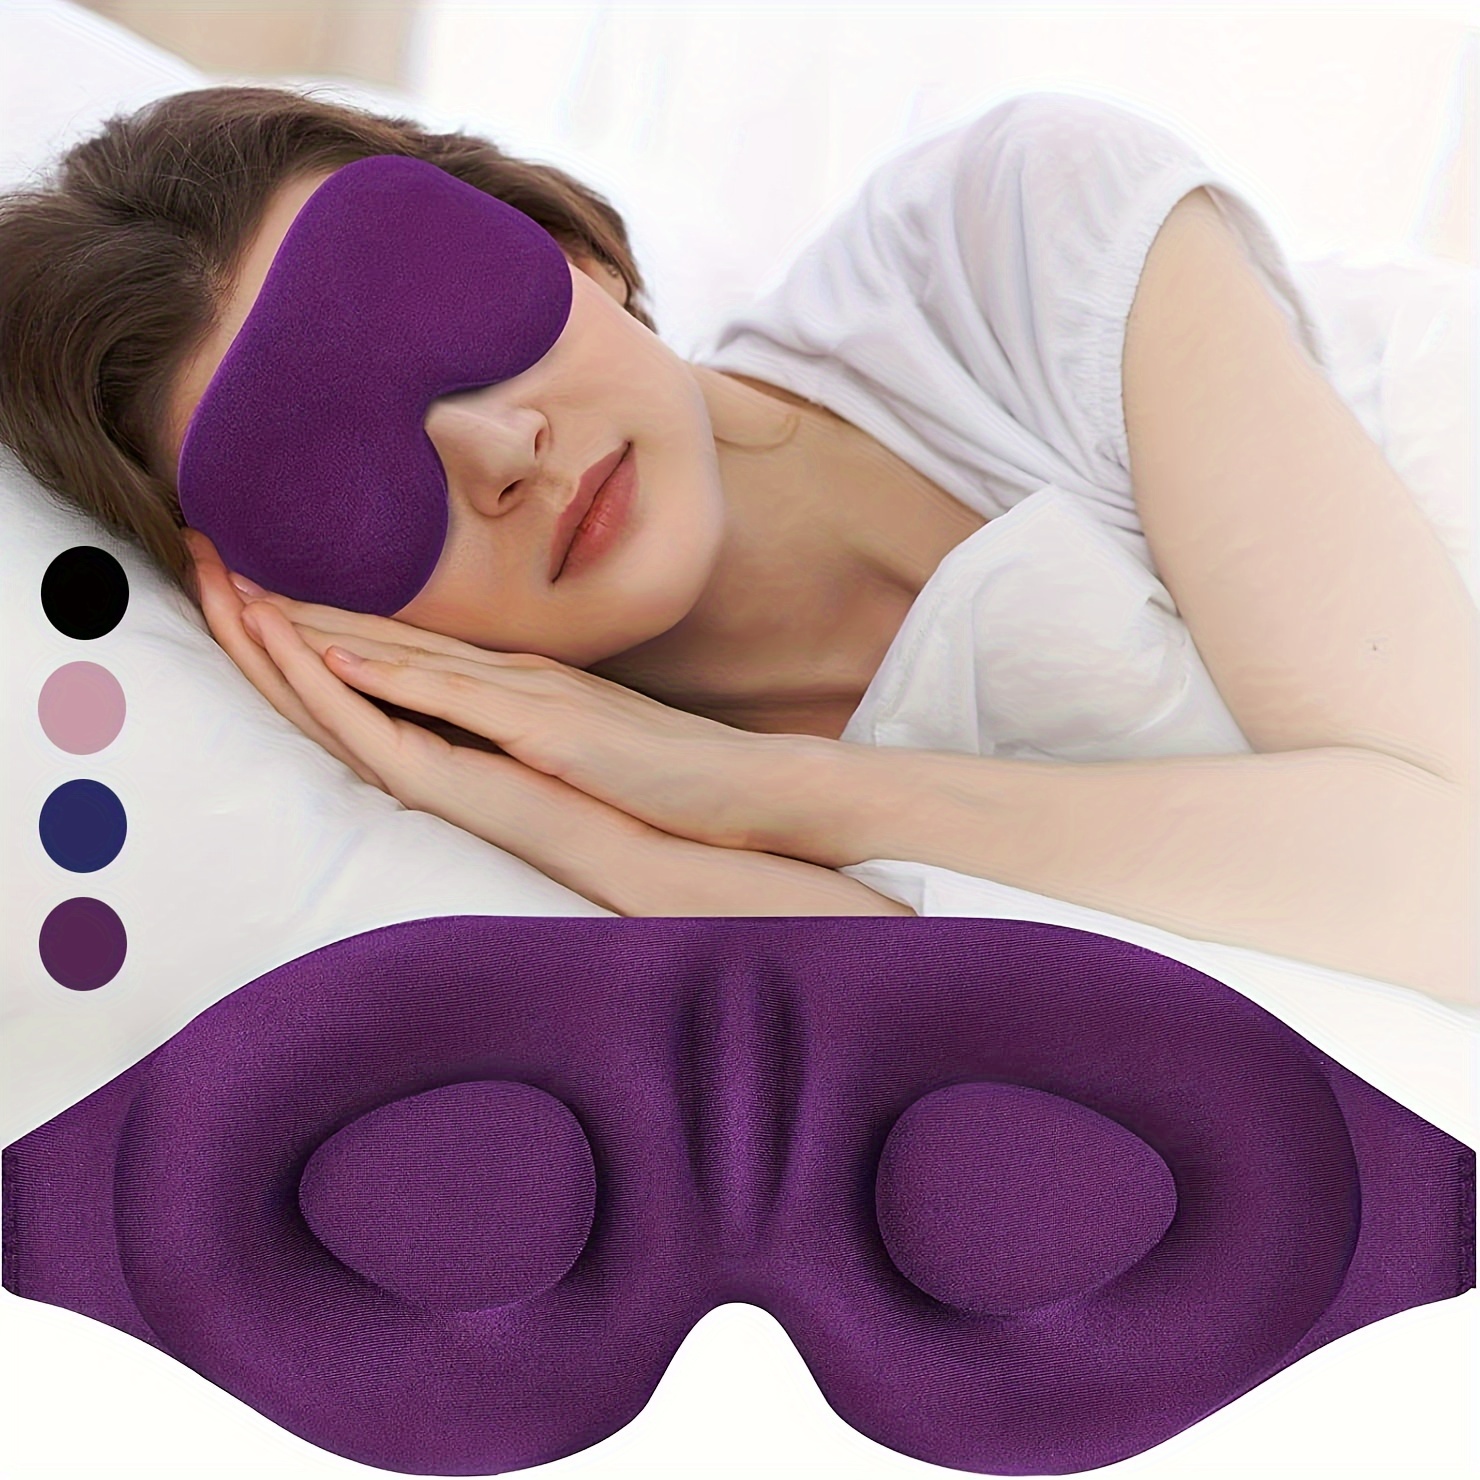 

Sleep Mask For Side Sleeper, 100% Light Blocking Upgraded 3d Contoured Cup Eye Mask With Adjustable Strap, Relaxing 0 Pressure Eye Cover, Night Blindfold Eye Mask For Men Women Travel Essentials